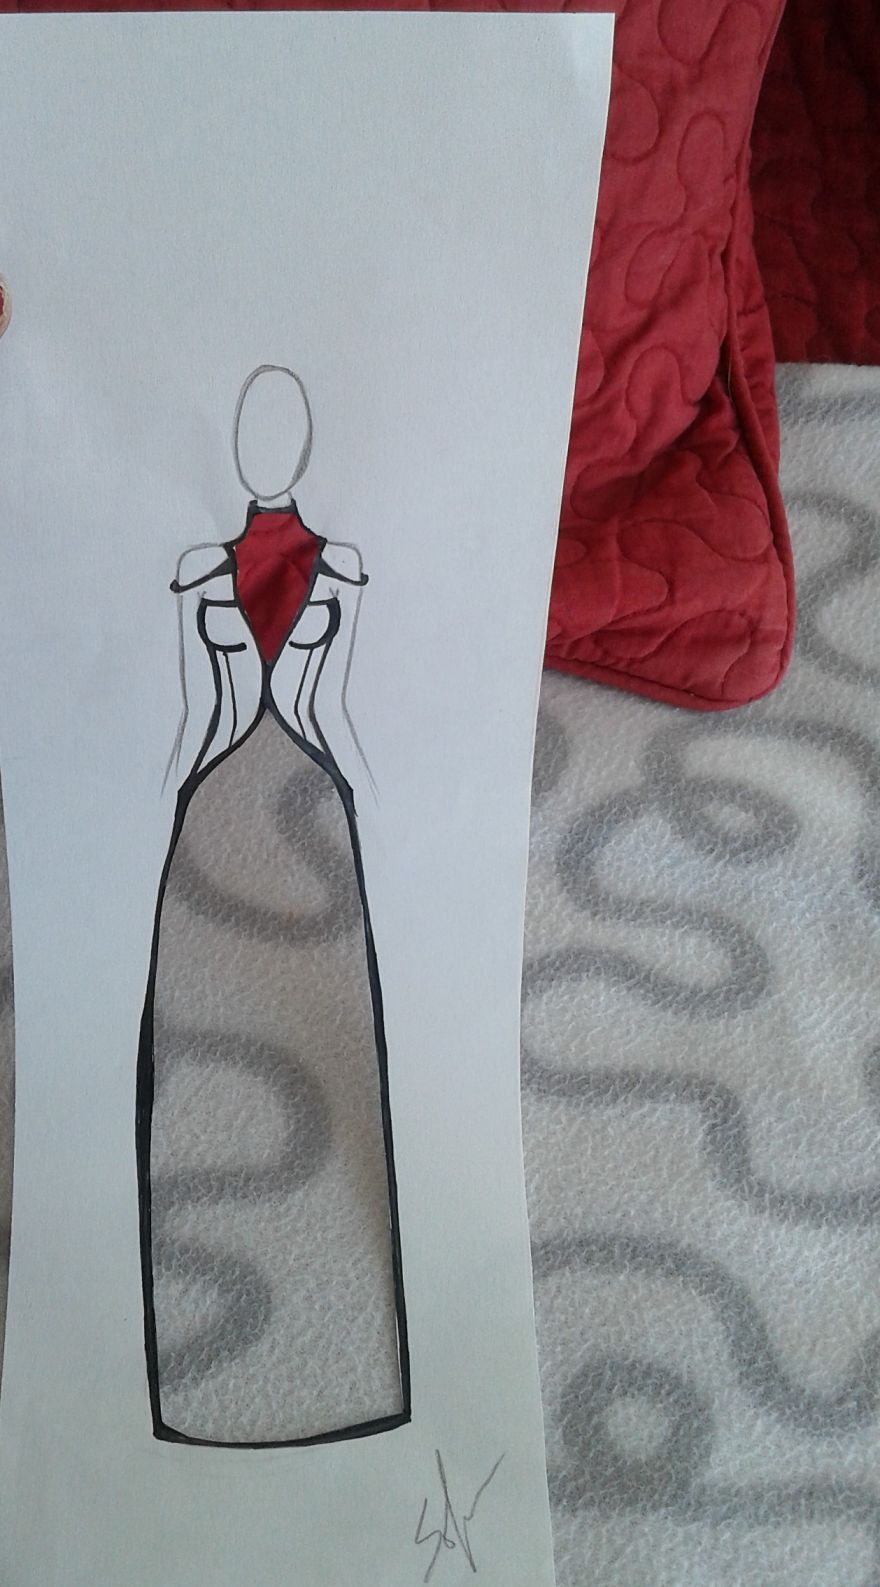 Playfull Cut-out Fashion Design Sketches